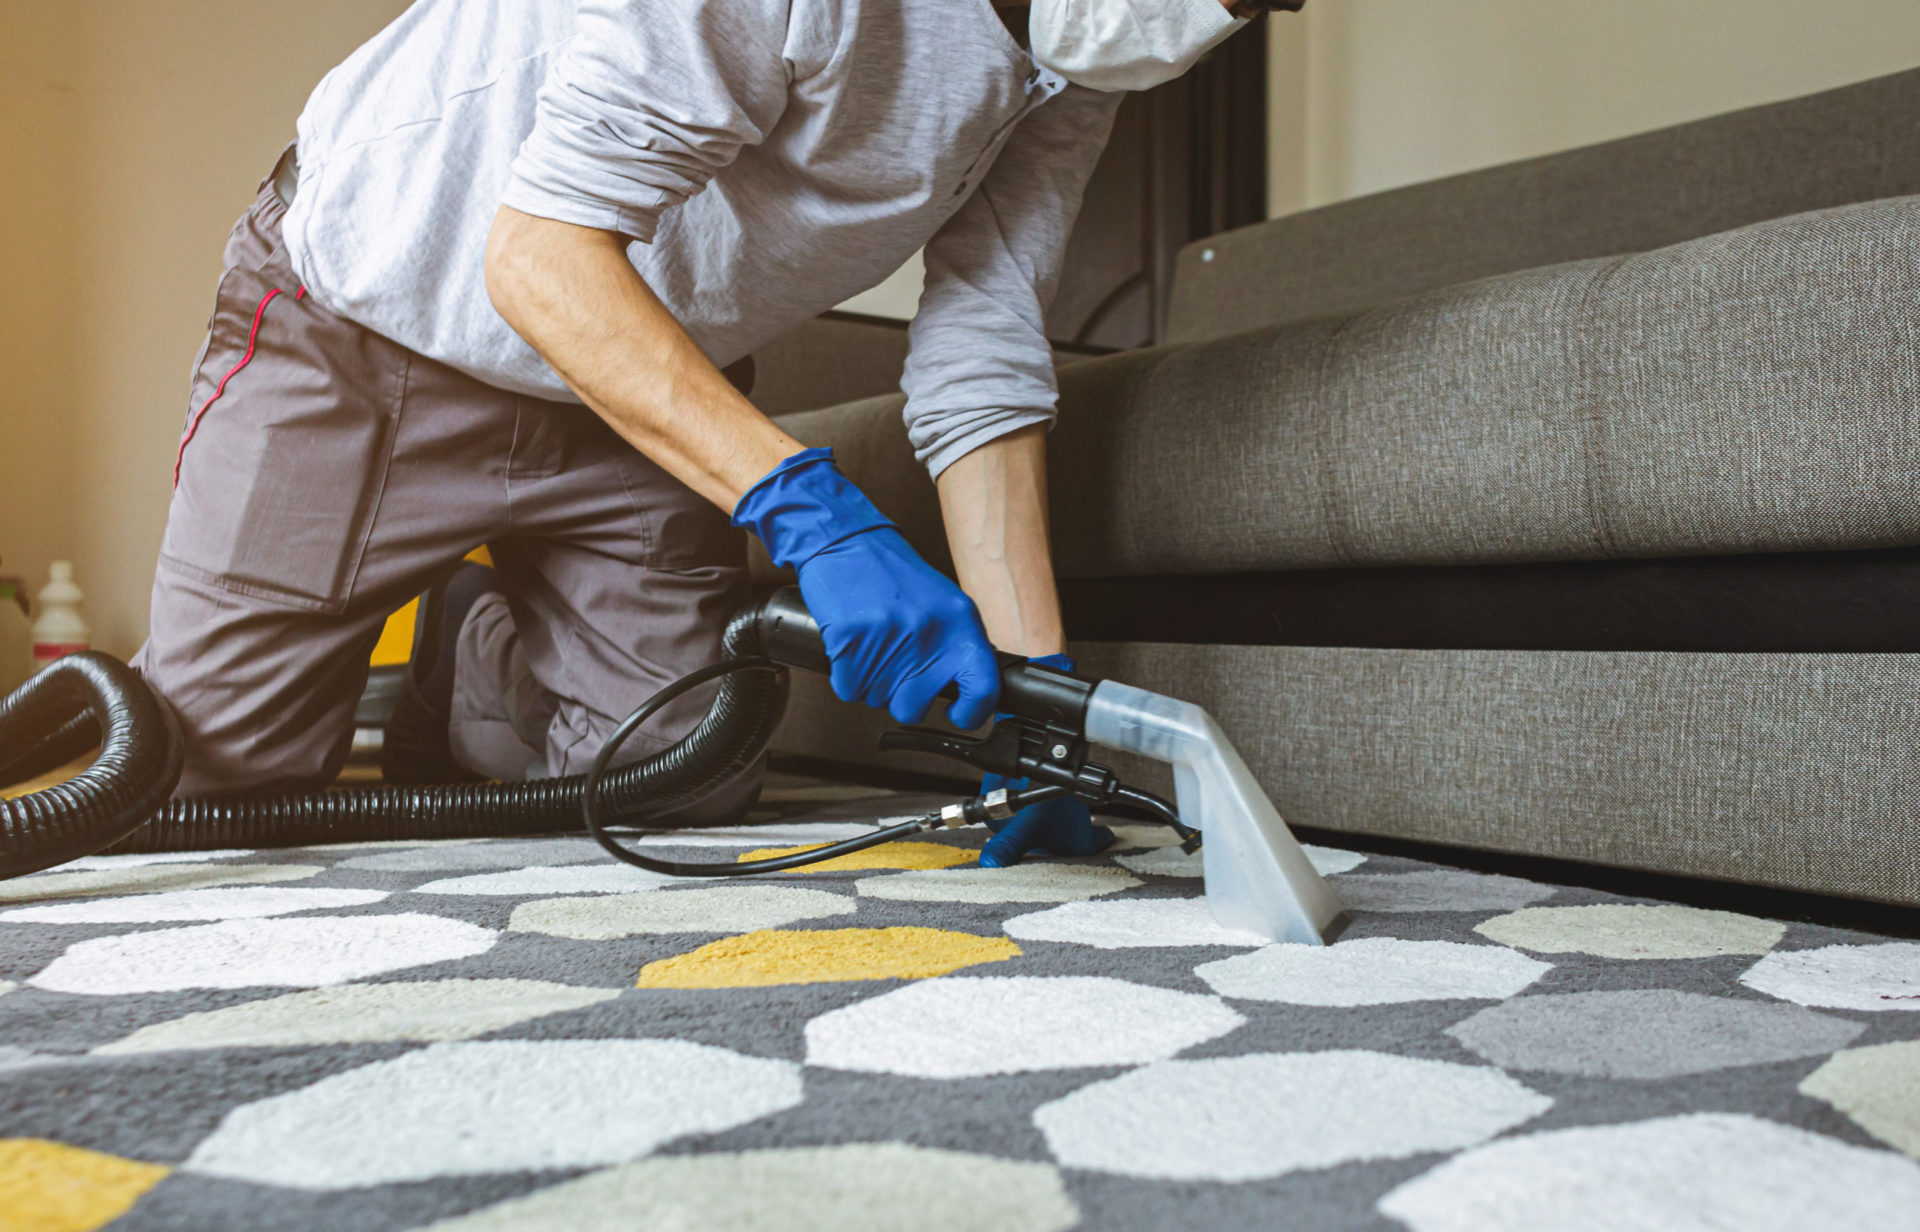 How to Disinfect a Carpet